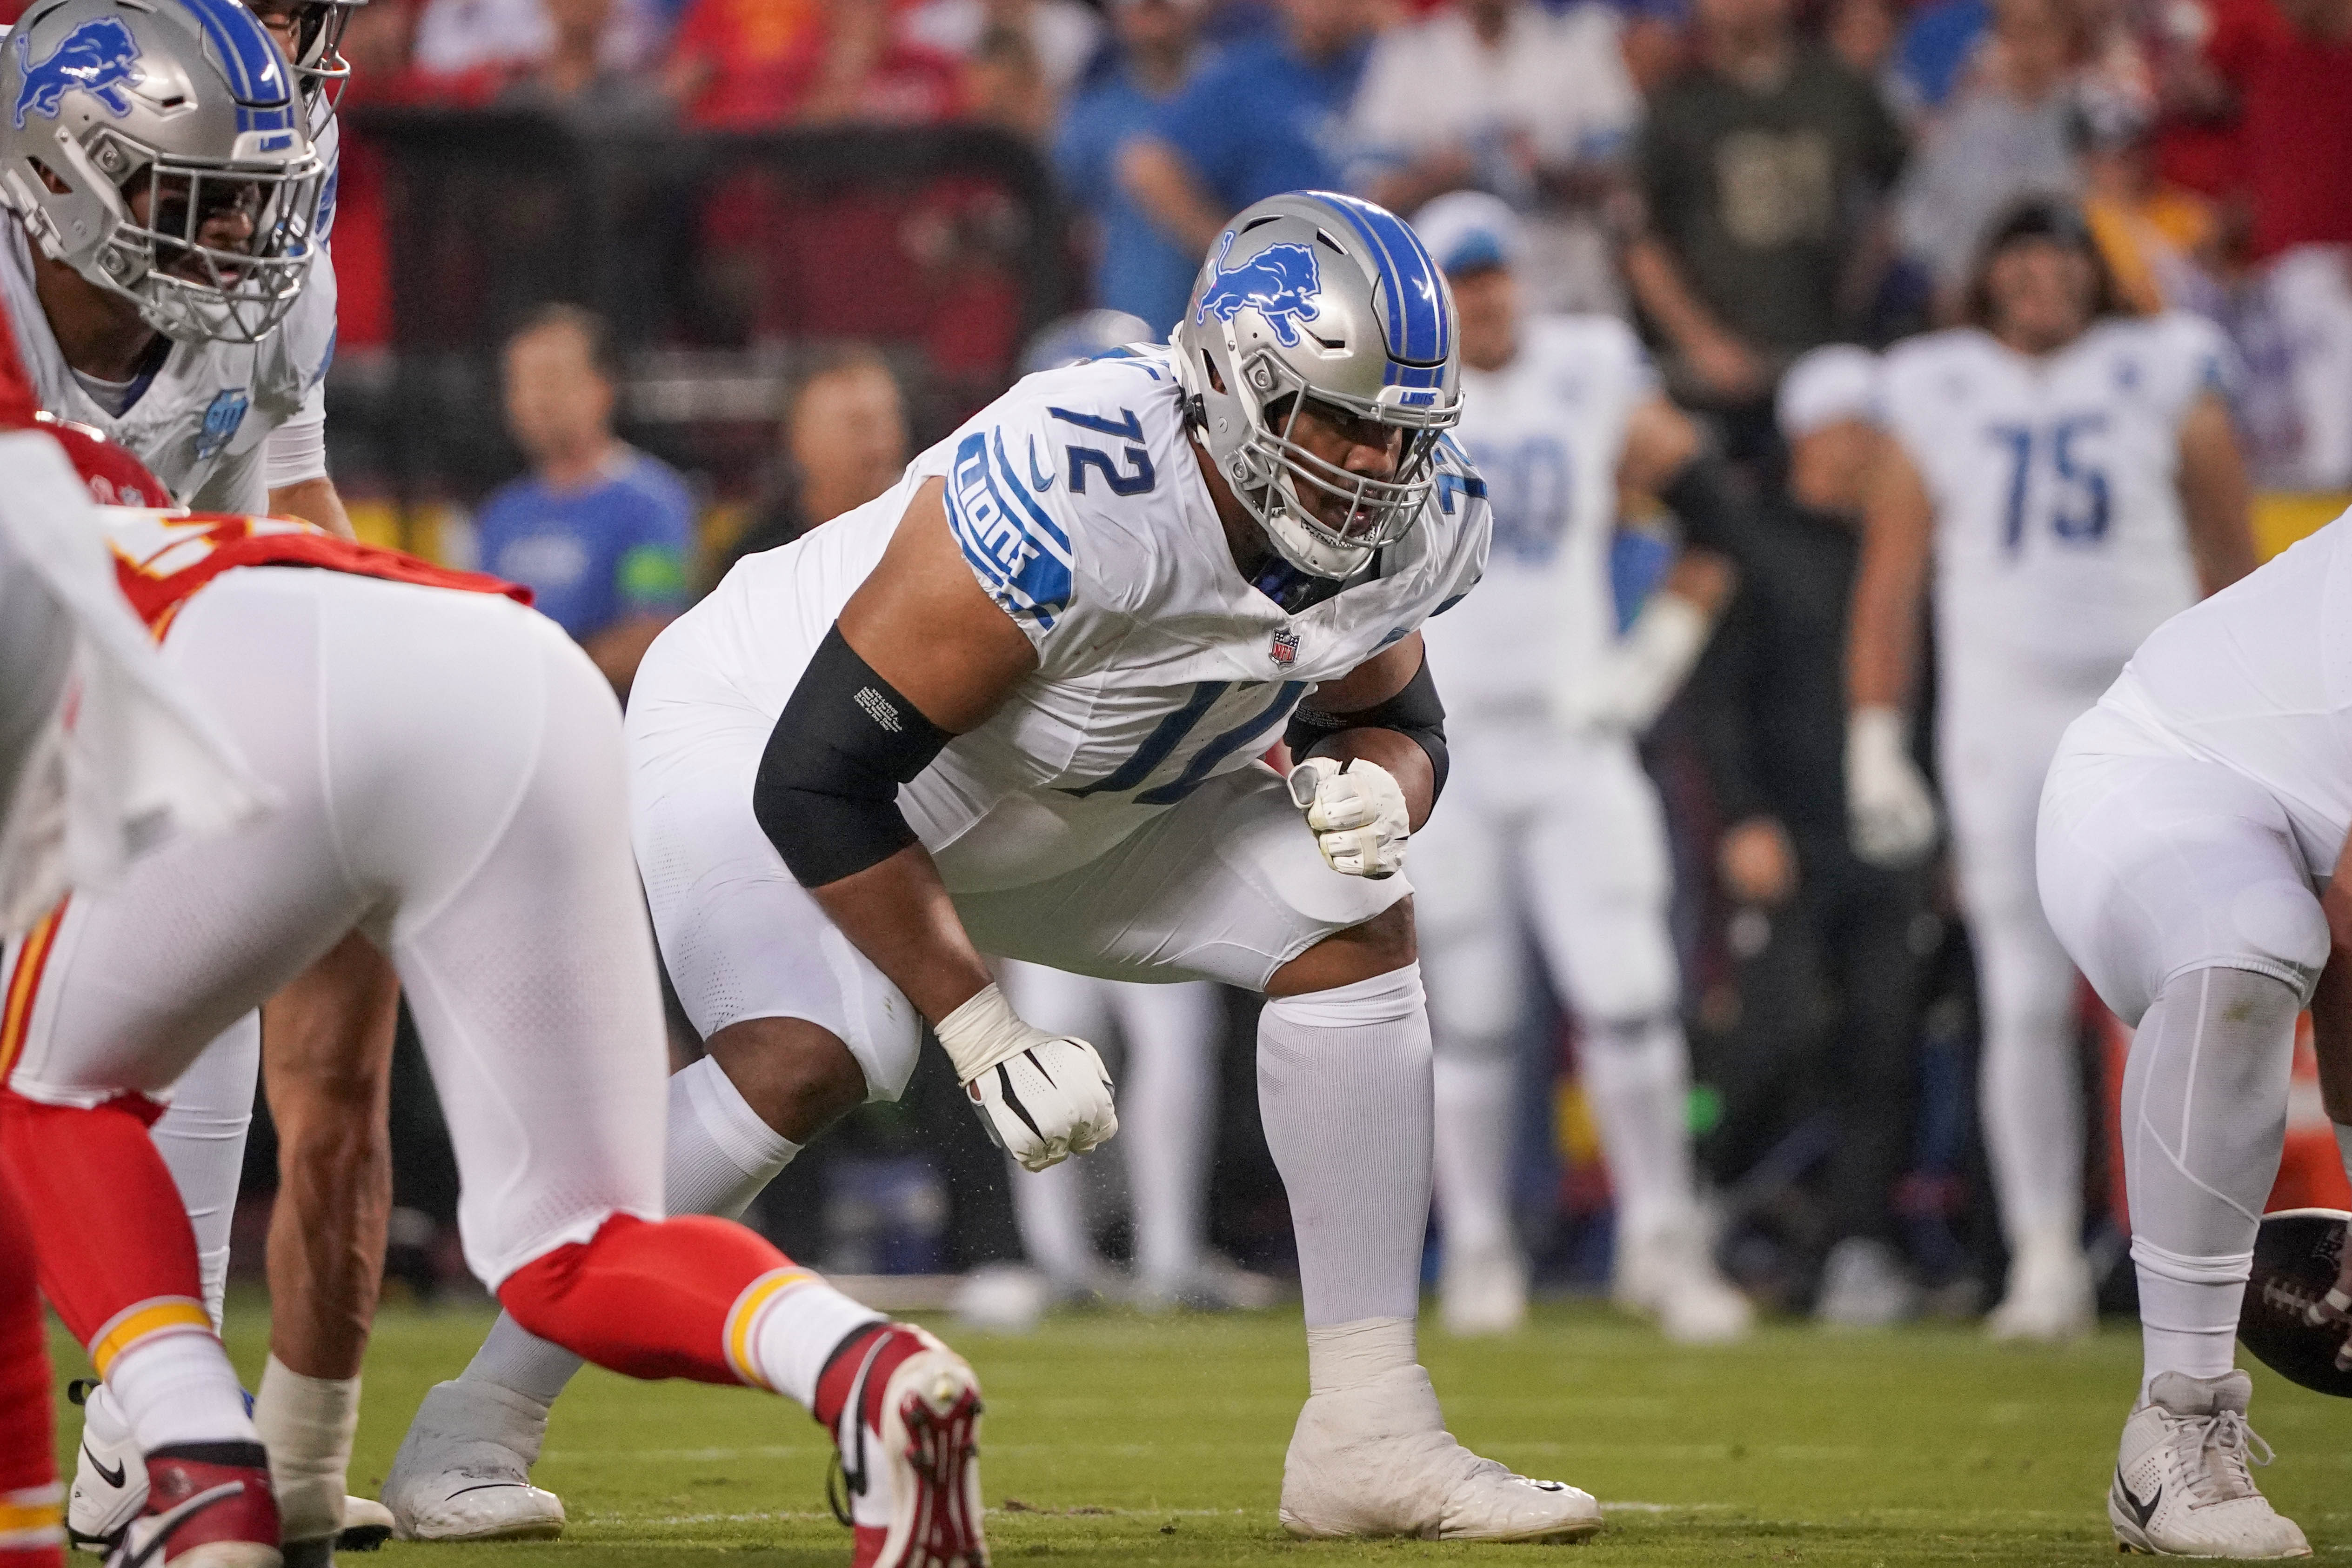 Sep 7, 2023; Kansas City, Missouri, USA; Detroit Lions guard Halapoulivaati Vaitai (72) on the line of scrimmage against the Kansas City Chiefs during the game at GEHA Field at Arrowhead Stadium. Mandatory Credit: Denny Medley-USA TODAY Sports